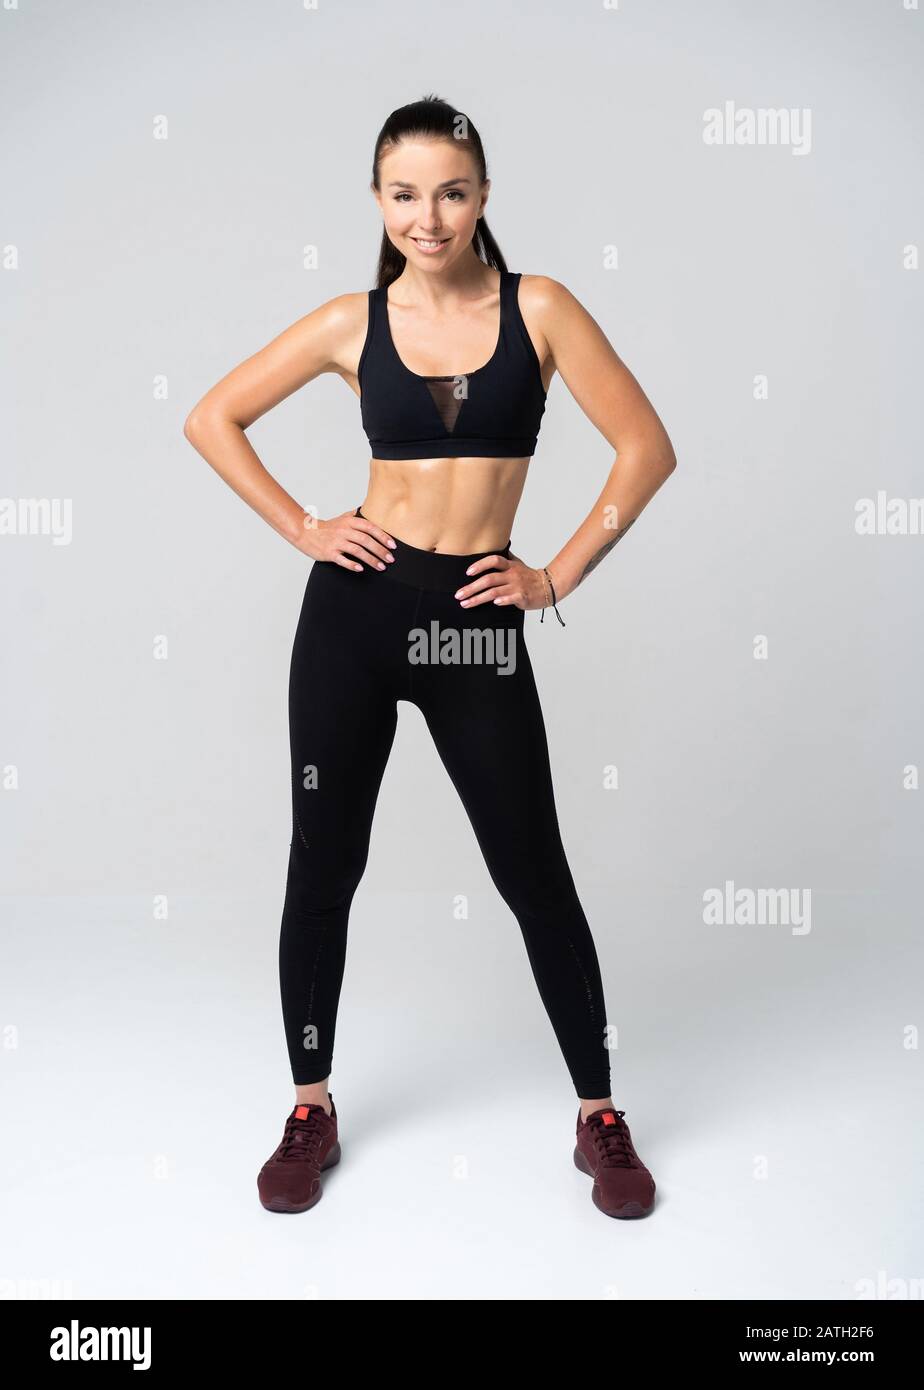 Young fit woman in sports outfit, studio photo Stock Photo